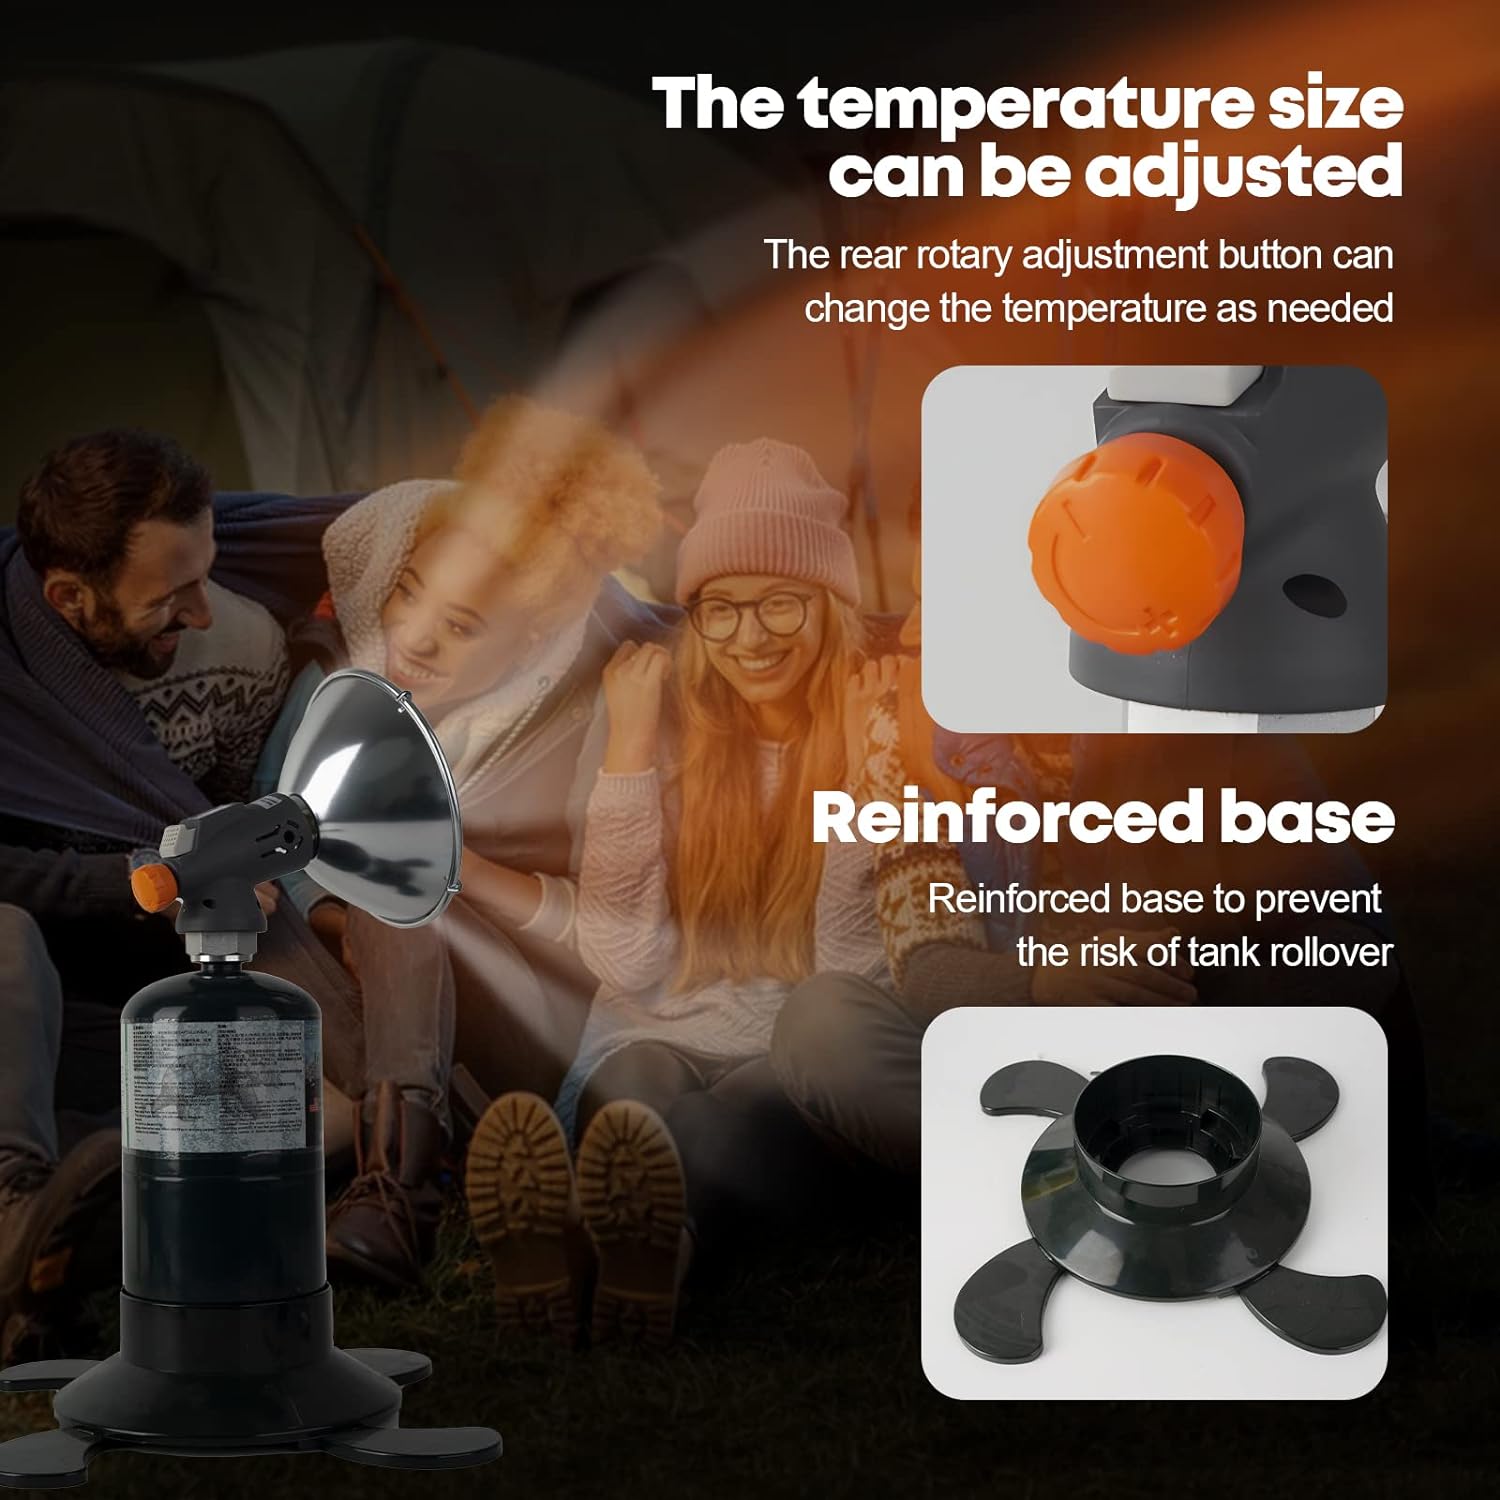 Portable Propane Heater For Outdoor, fishing, camping - Portable Propane Heater For Outdoor Review